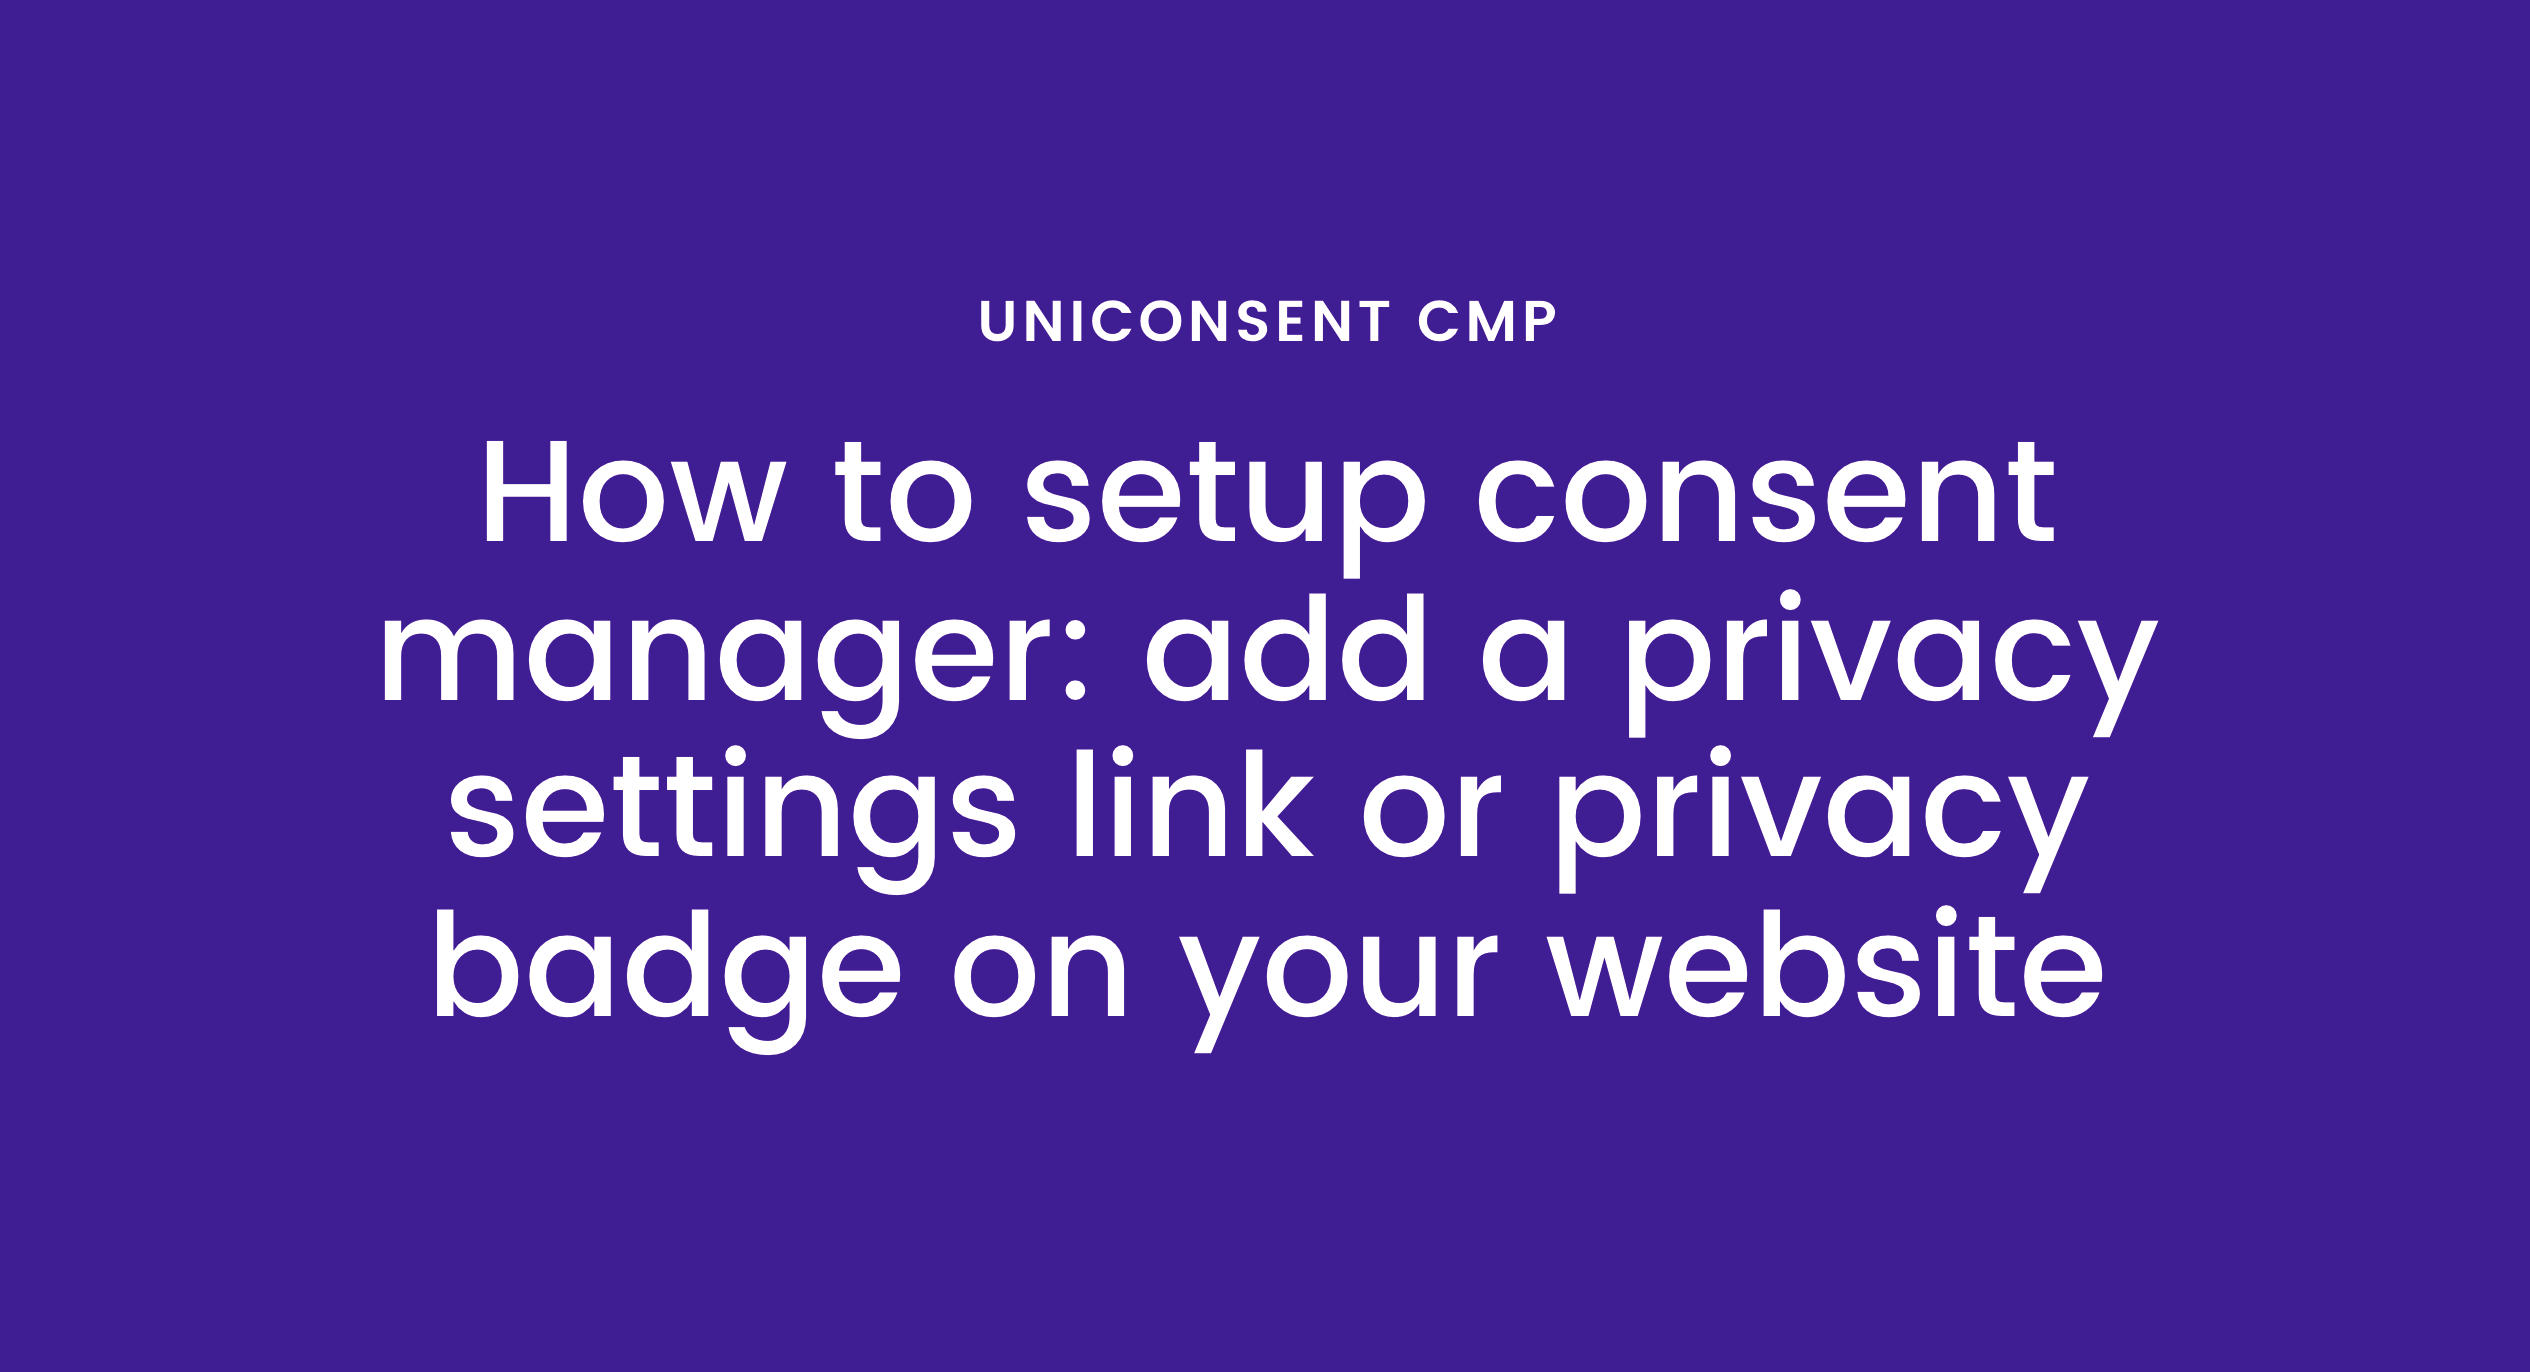 How to Add a Privacy Settings Link or Privacy Badge on Your Website to Manage GDPR/CCPA Consent